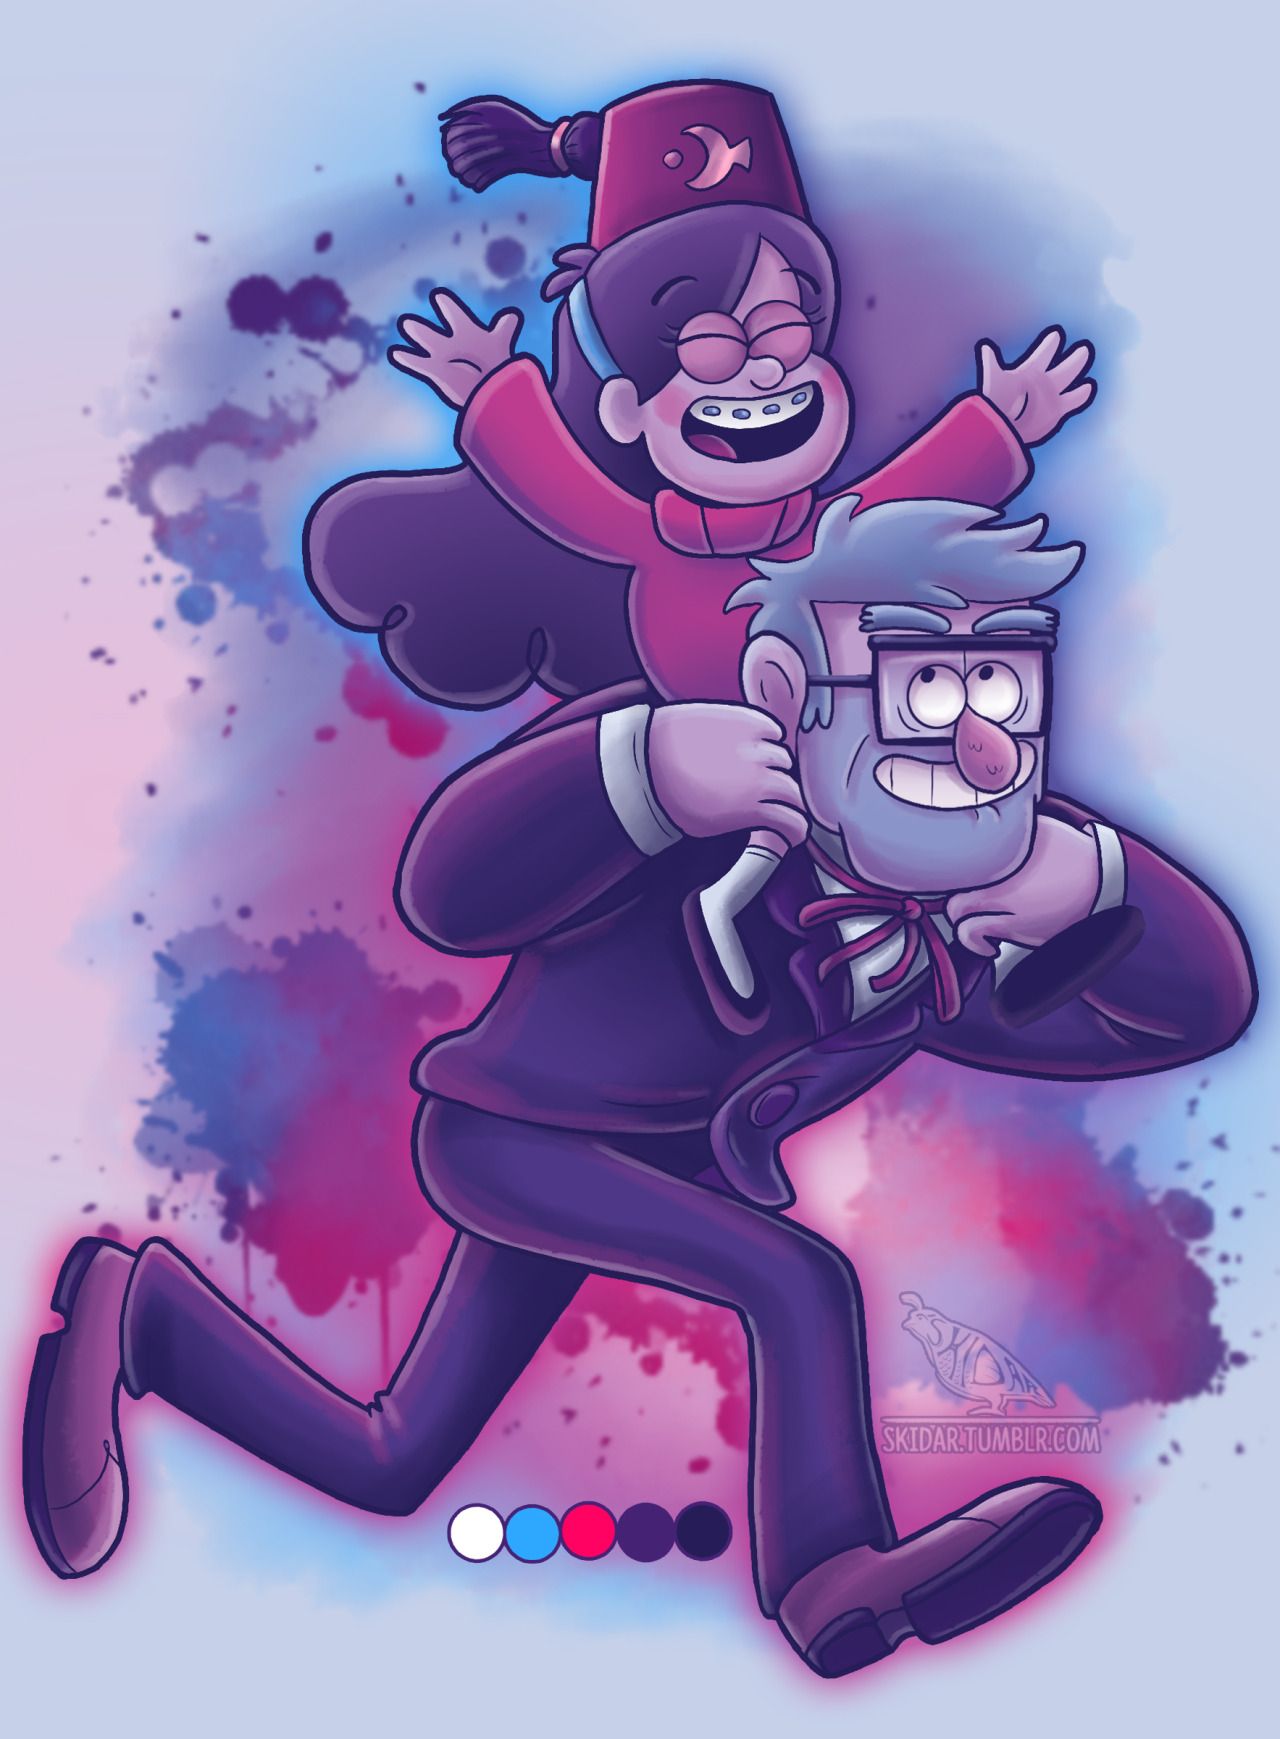 Mabel And Stanley Pines - HD Wallpaper 